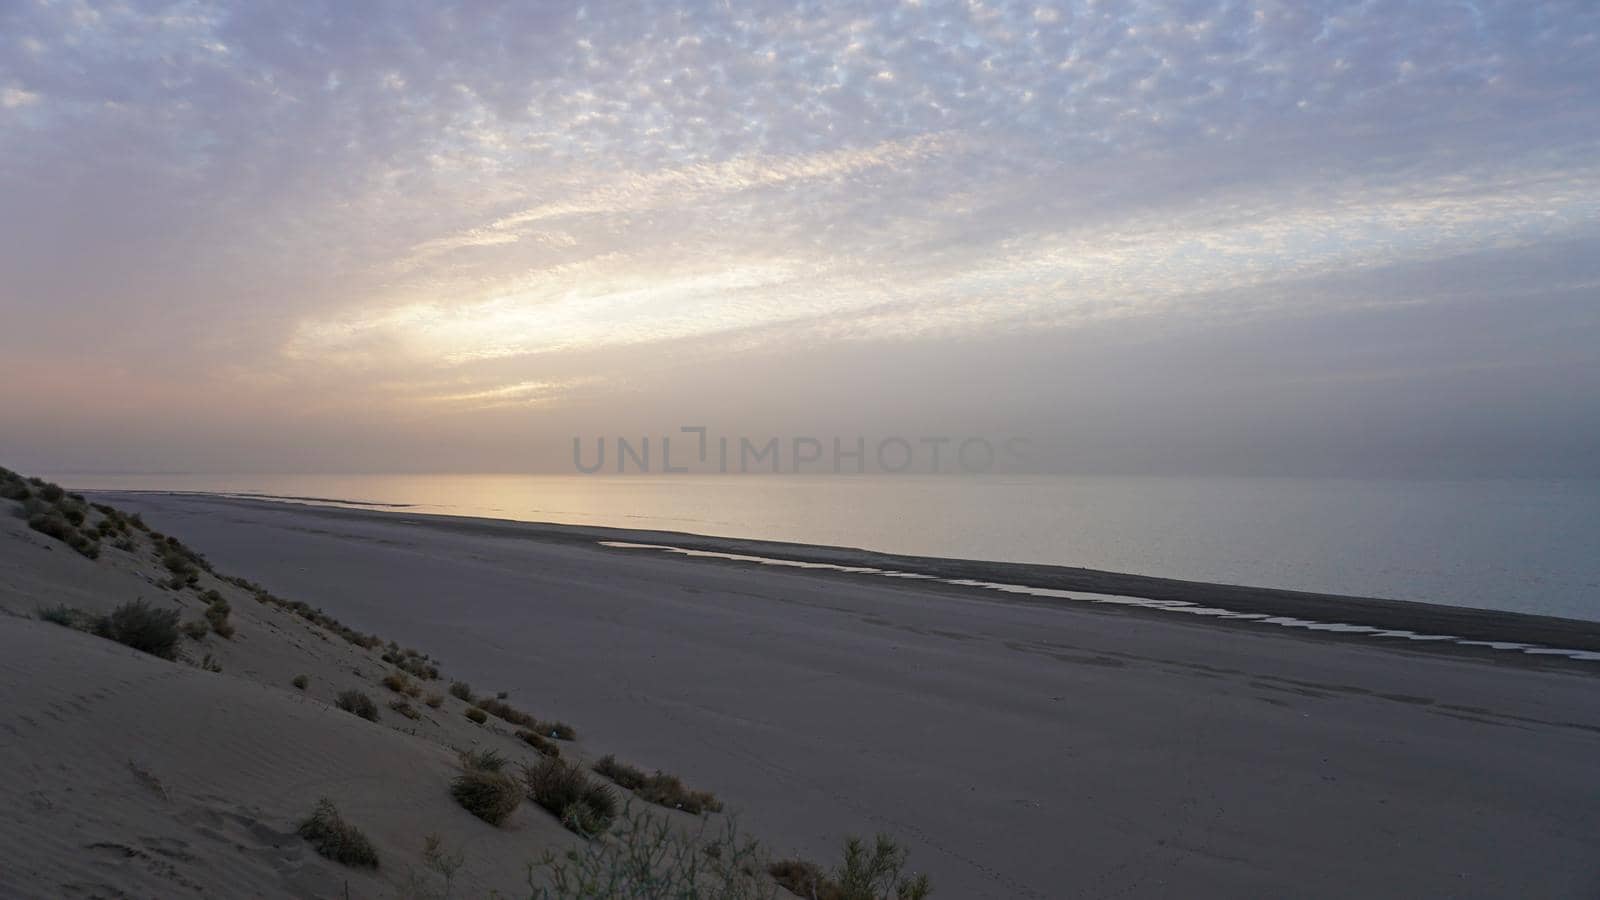 Dawn on the sandy beach of the sea. Sand dune. The sun's rays peek out from behind the clouds. Car tracks in the sand. A light wave, almost calm. The water merges with the sky. Autumn morning